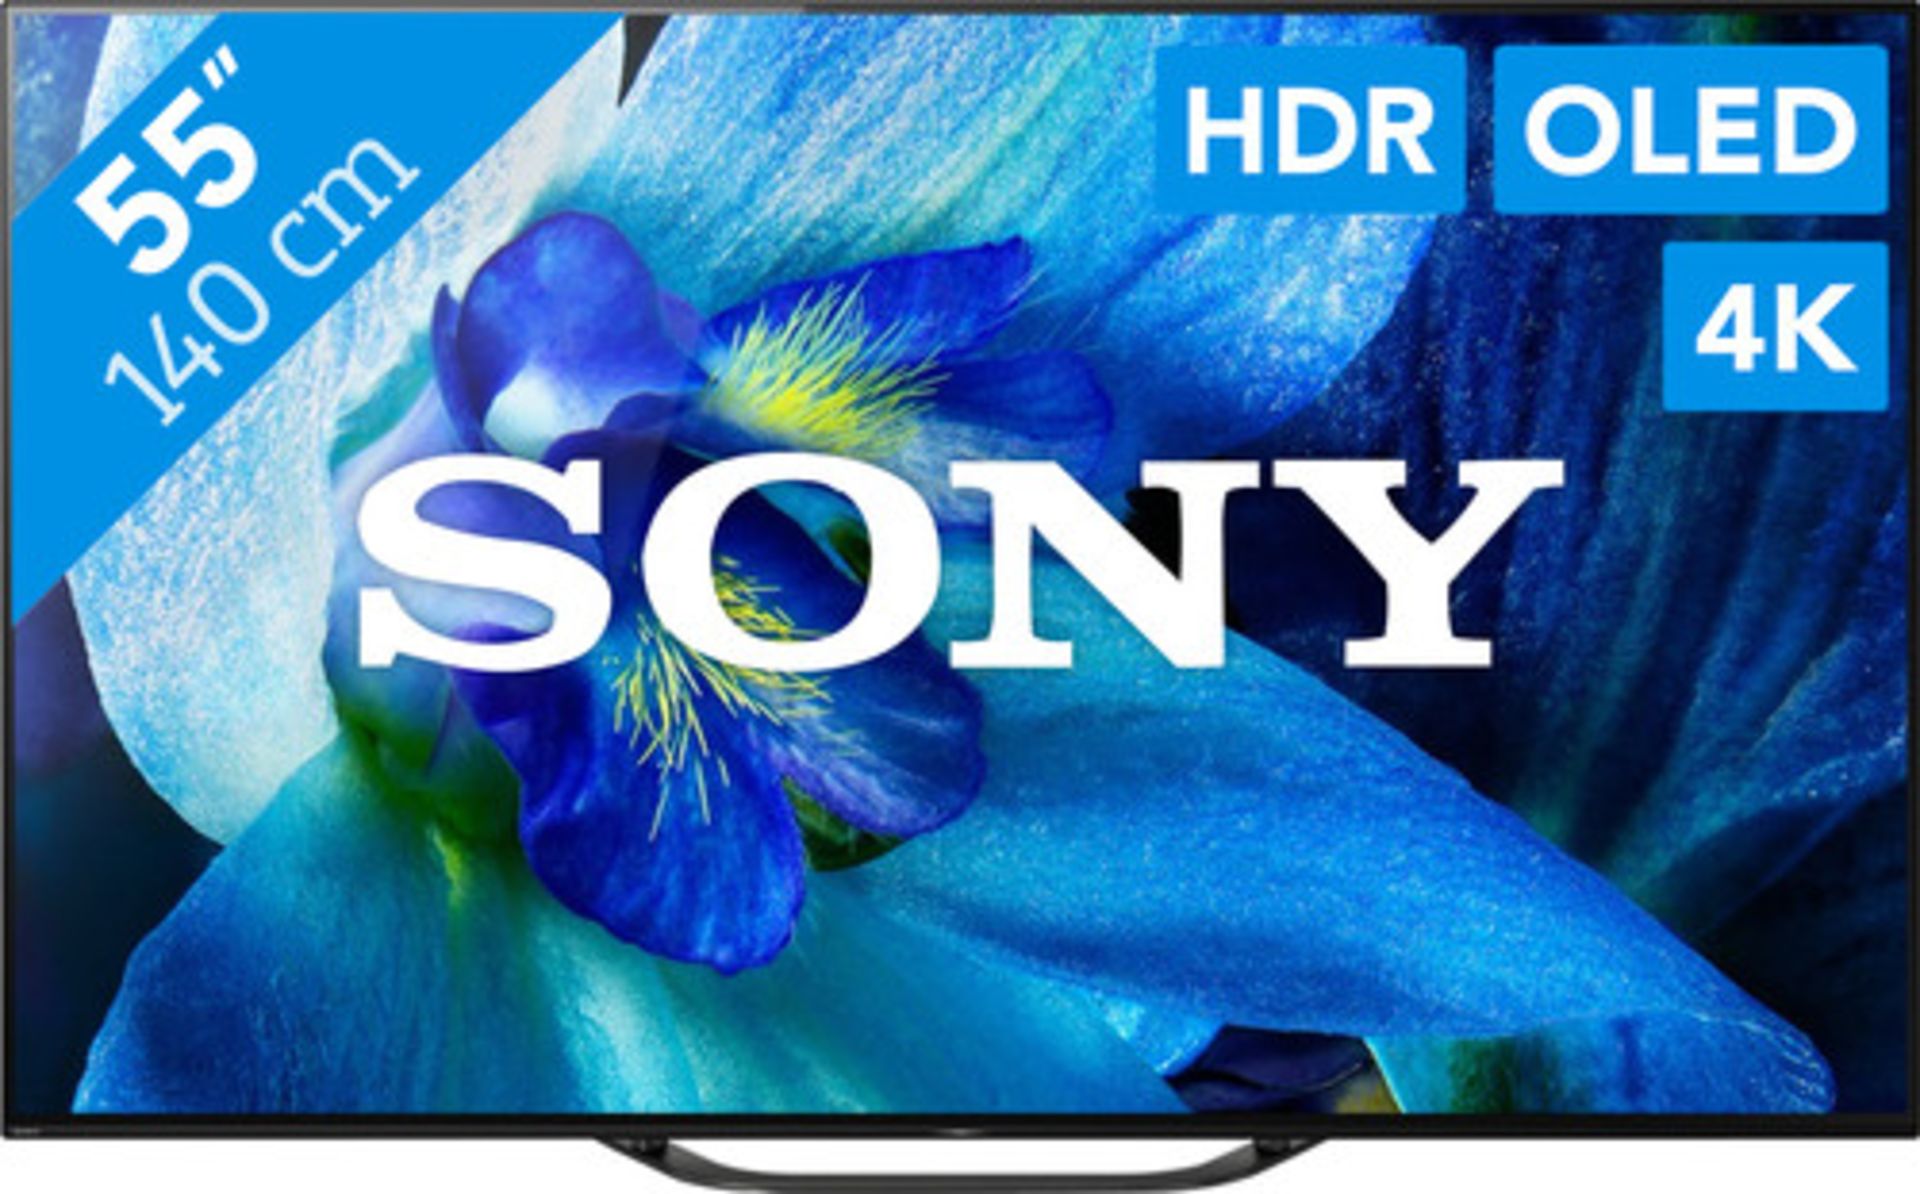 1 BOXED SONY BRAVIA 55" KD-55AG8 4K OLED ULTRA HD SMART TV WITH REMOTE RRP Â£1799 (WORKING, IN